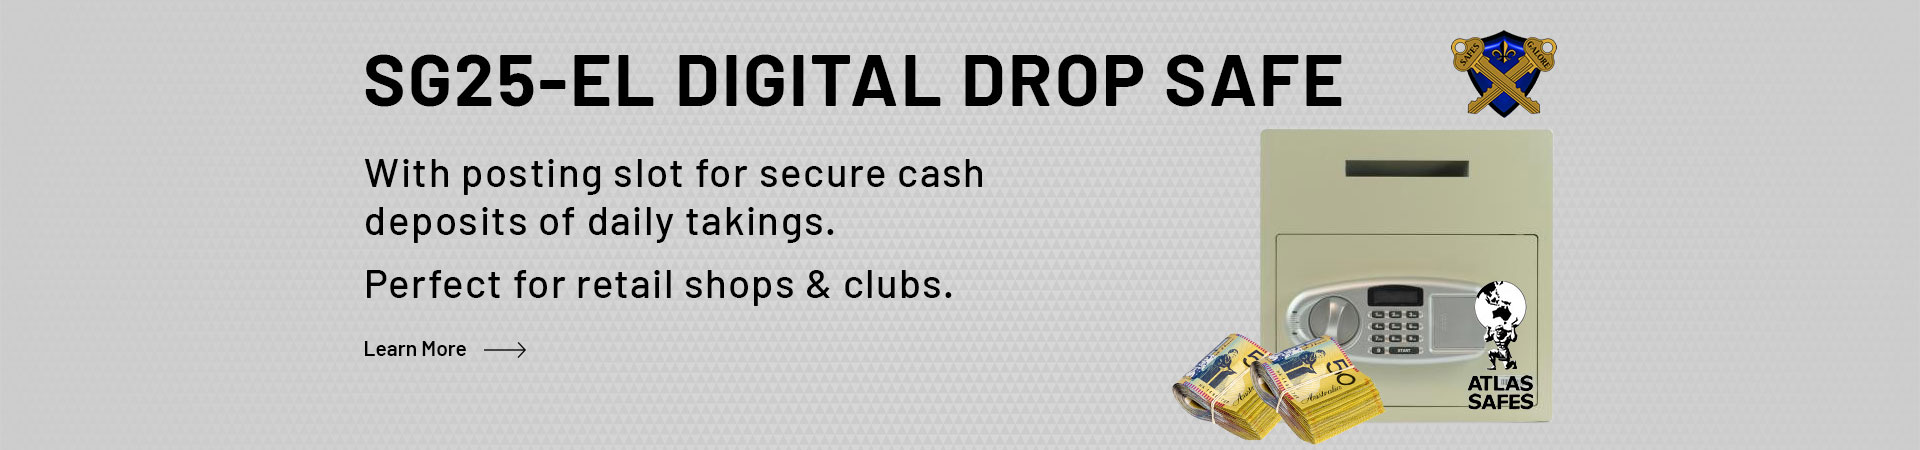 Learn more about the SG25-EL Digital Drop Safe. Perfect for retail shops and clubs, this safe is equiped with a posting slot for secure cash deposits.